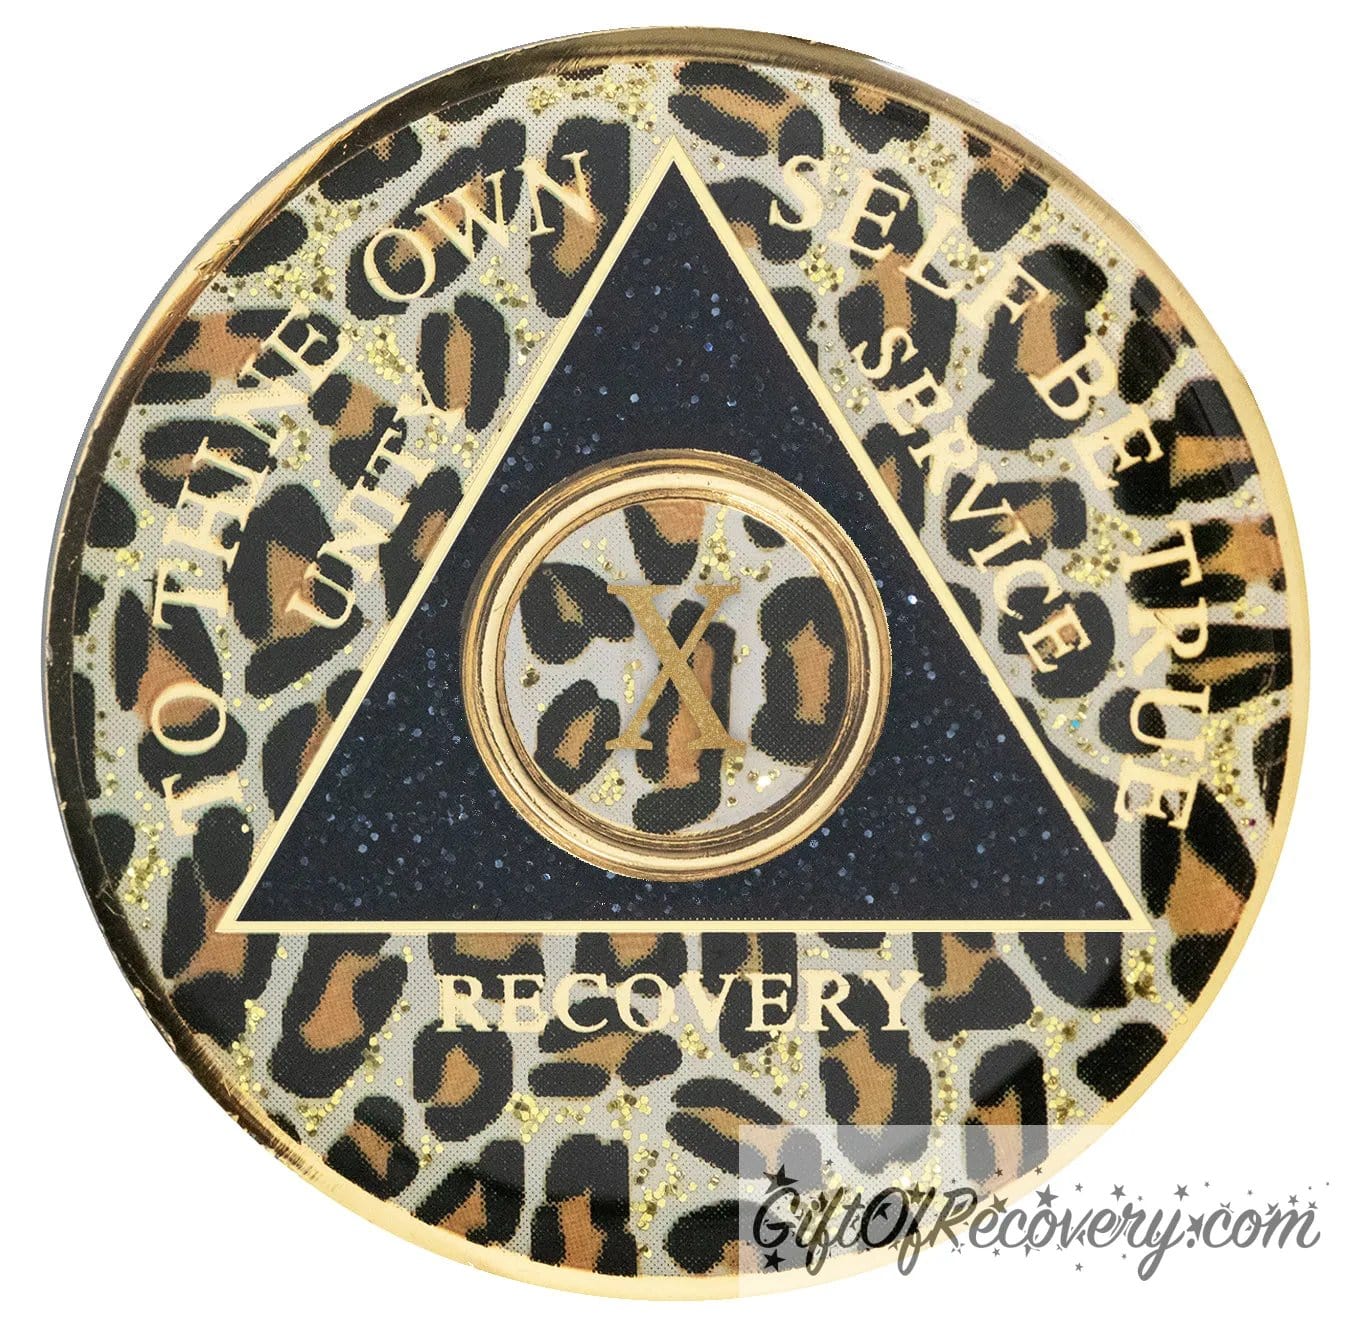 10 year AA medallion leopard print with gold flaked spots, to thine own self be true, unity, service, recovery, and roman numeral are gold foil so you can let your recovery shine, not your time, the circle triangle is embossed with 14k gold-plated brass, the recovery medallion is sealed with resin for a shiny finish.